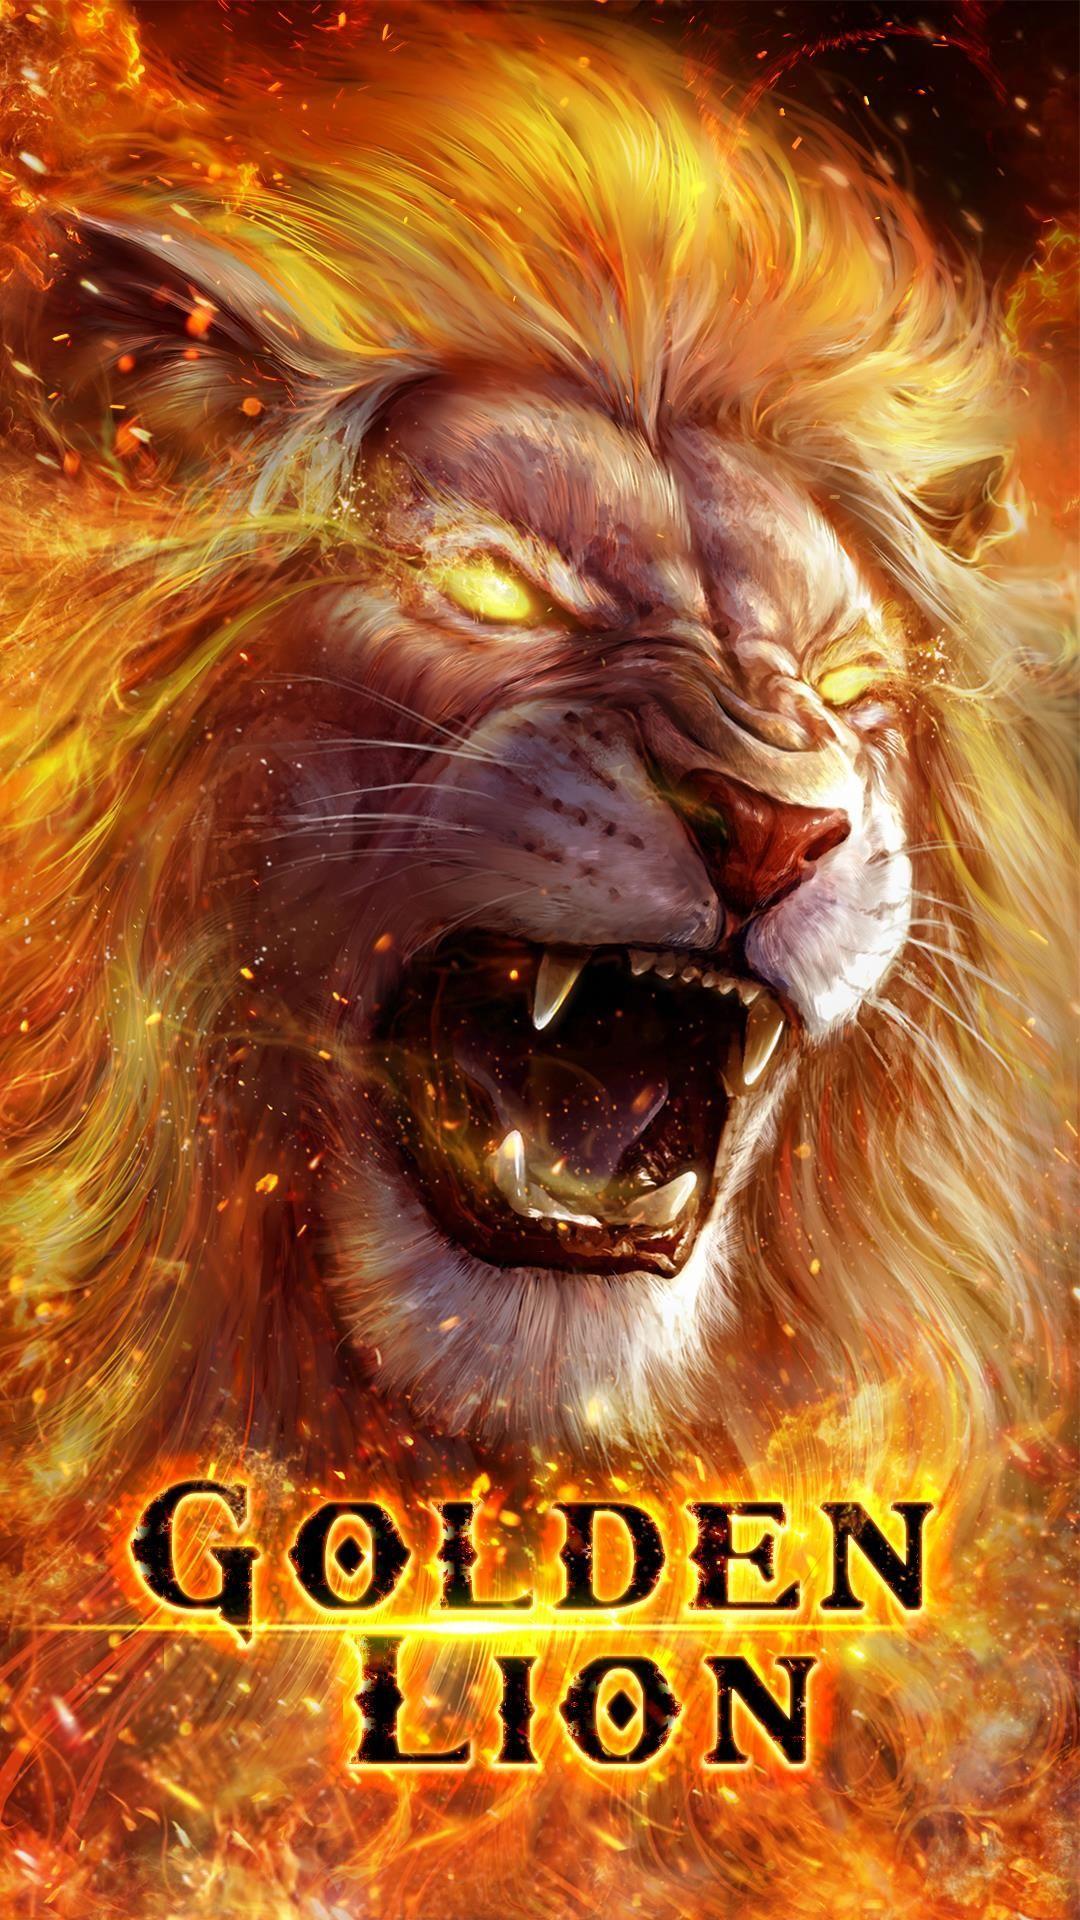 Golden lion live wallpaper!. Android live wallpaper from Ahatheme